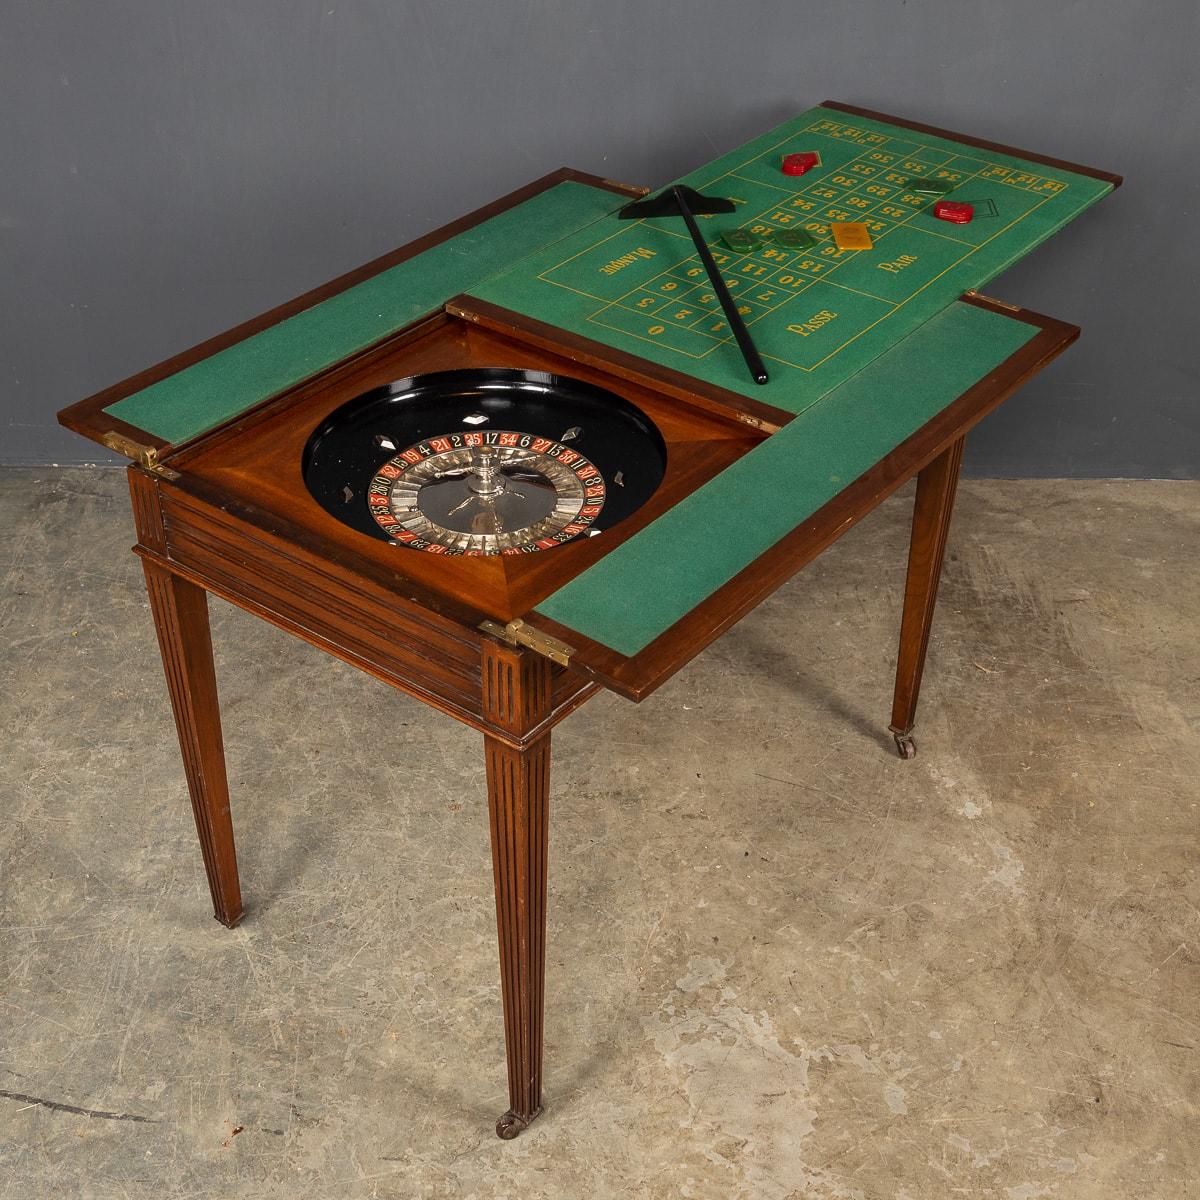 Antique early 20th century Edwardian gaming table in rich mahogany, the top of the table opens to reveal upholstered fine green felt fabric surface, set with a roulette wheel, dice and two shakers, gambling chips, cribbage board and playing cards.